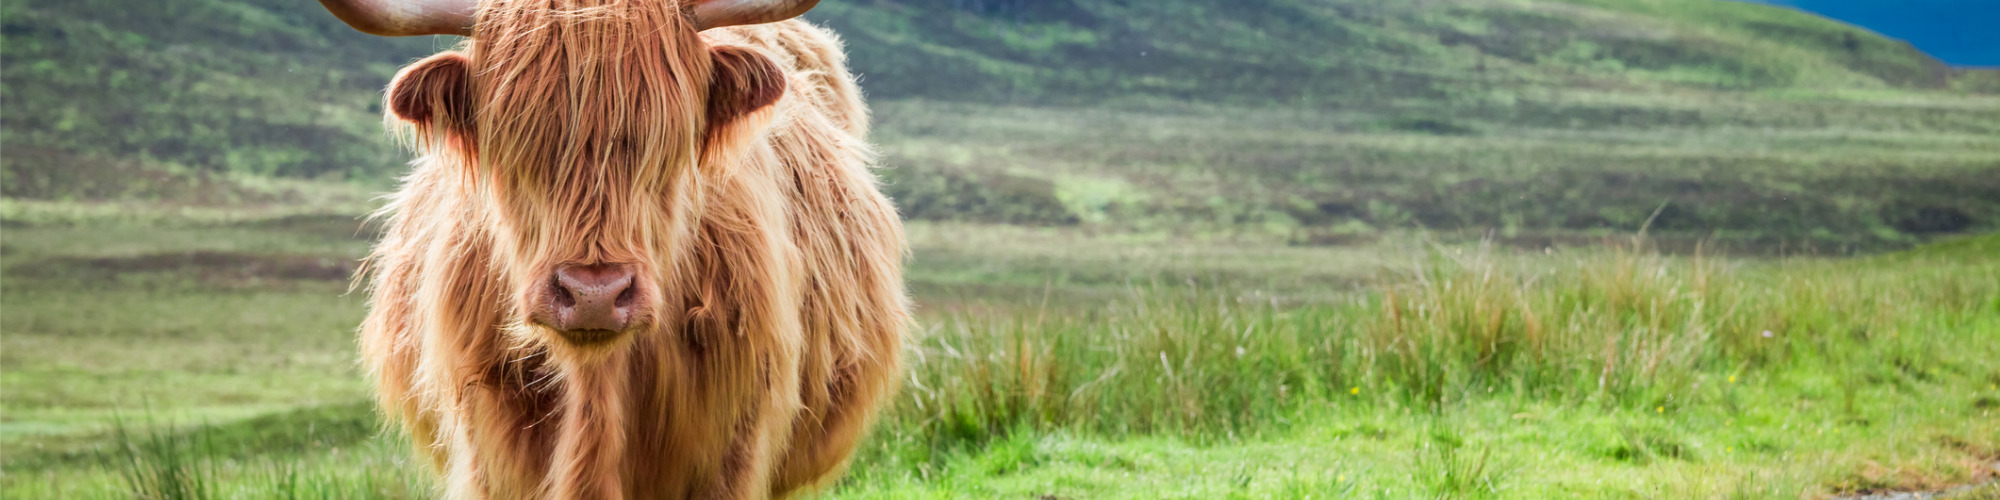 Succession Planning & Agricultural Tenancies in Scotland - Live at Your Desk